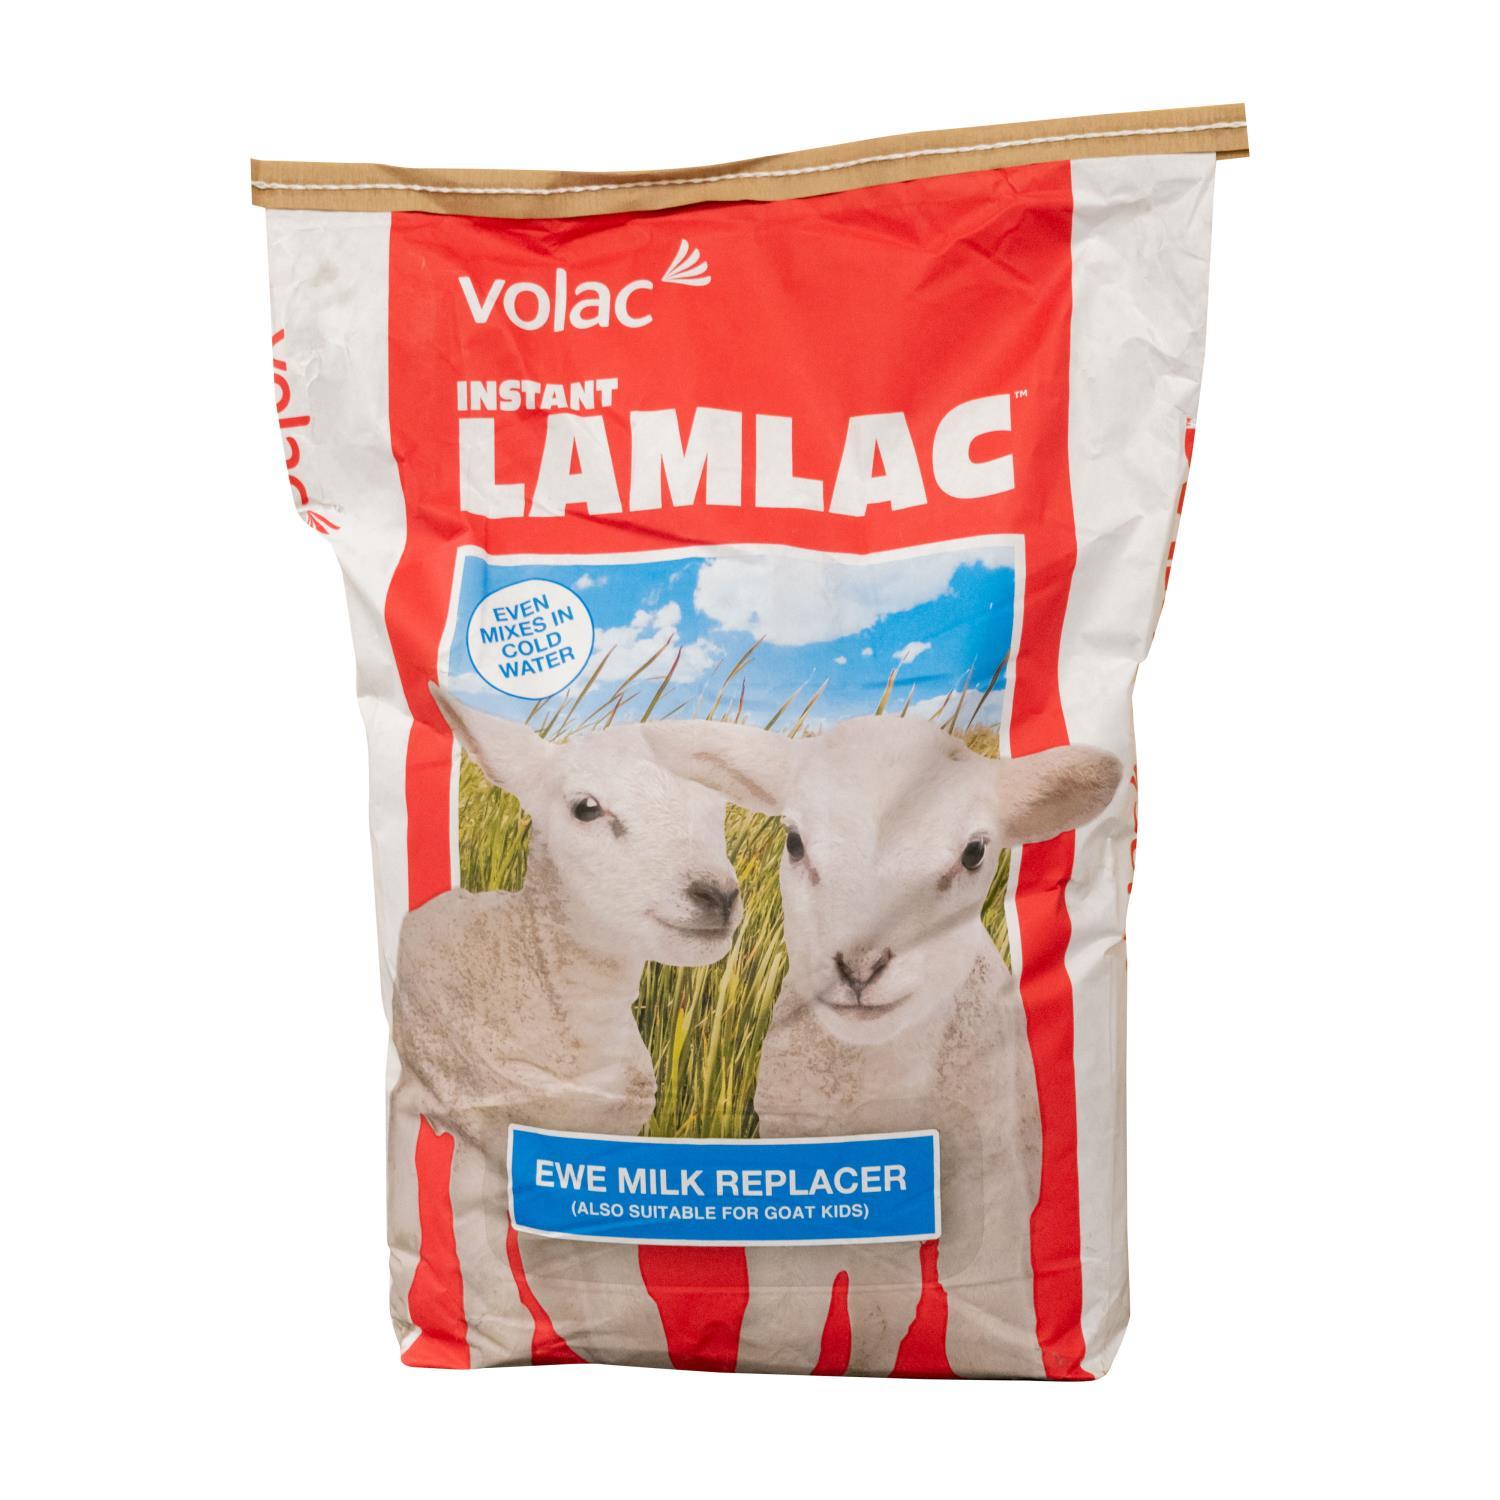 Buy Volac Lamlac Instant Lamb Milk Replacer 20Kg from Fane Valley ...